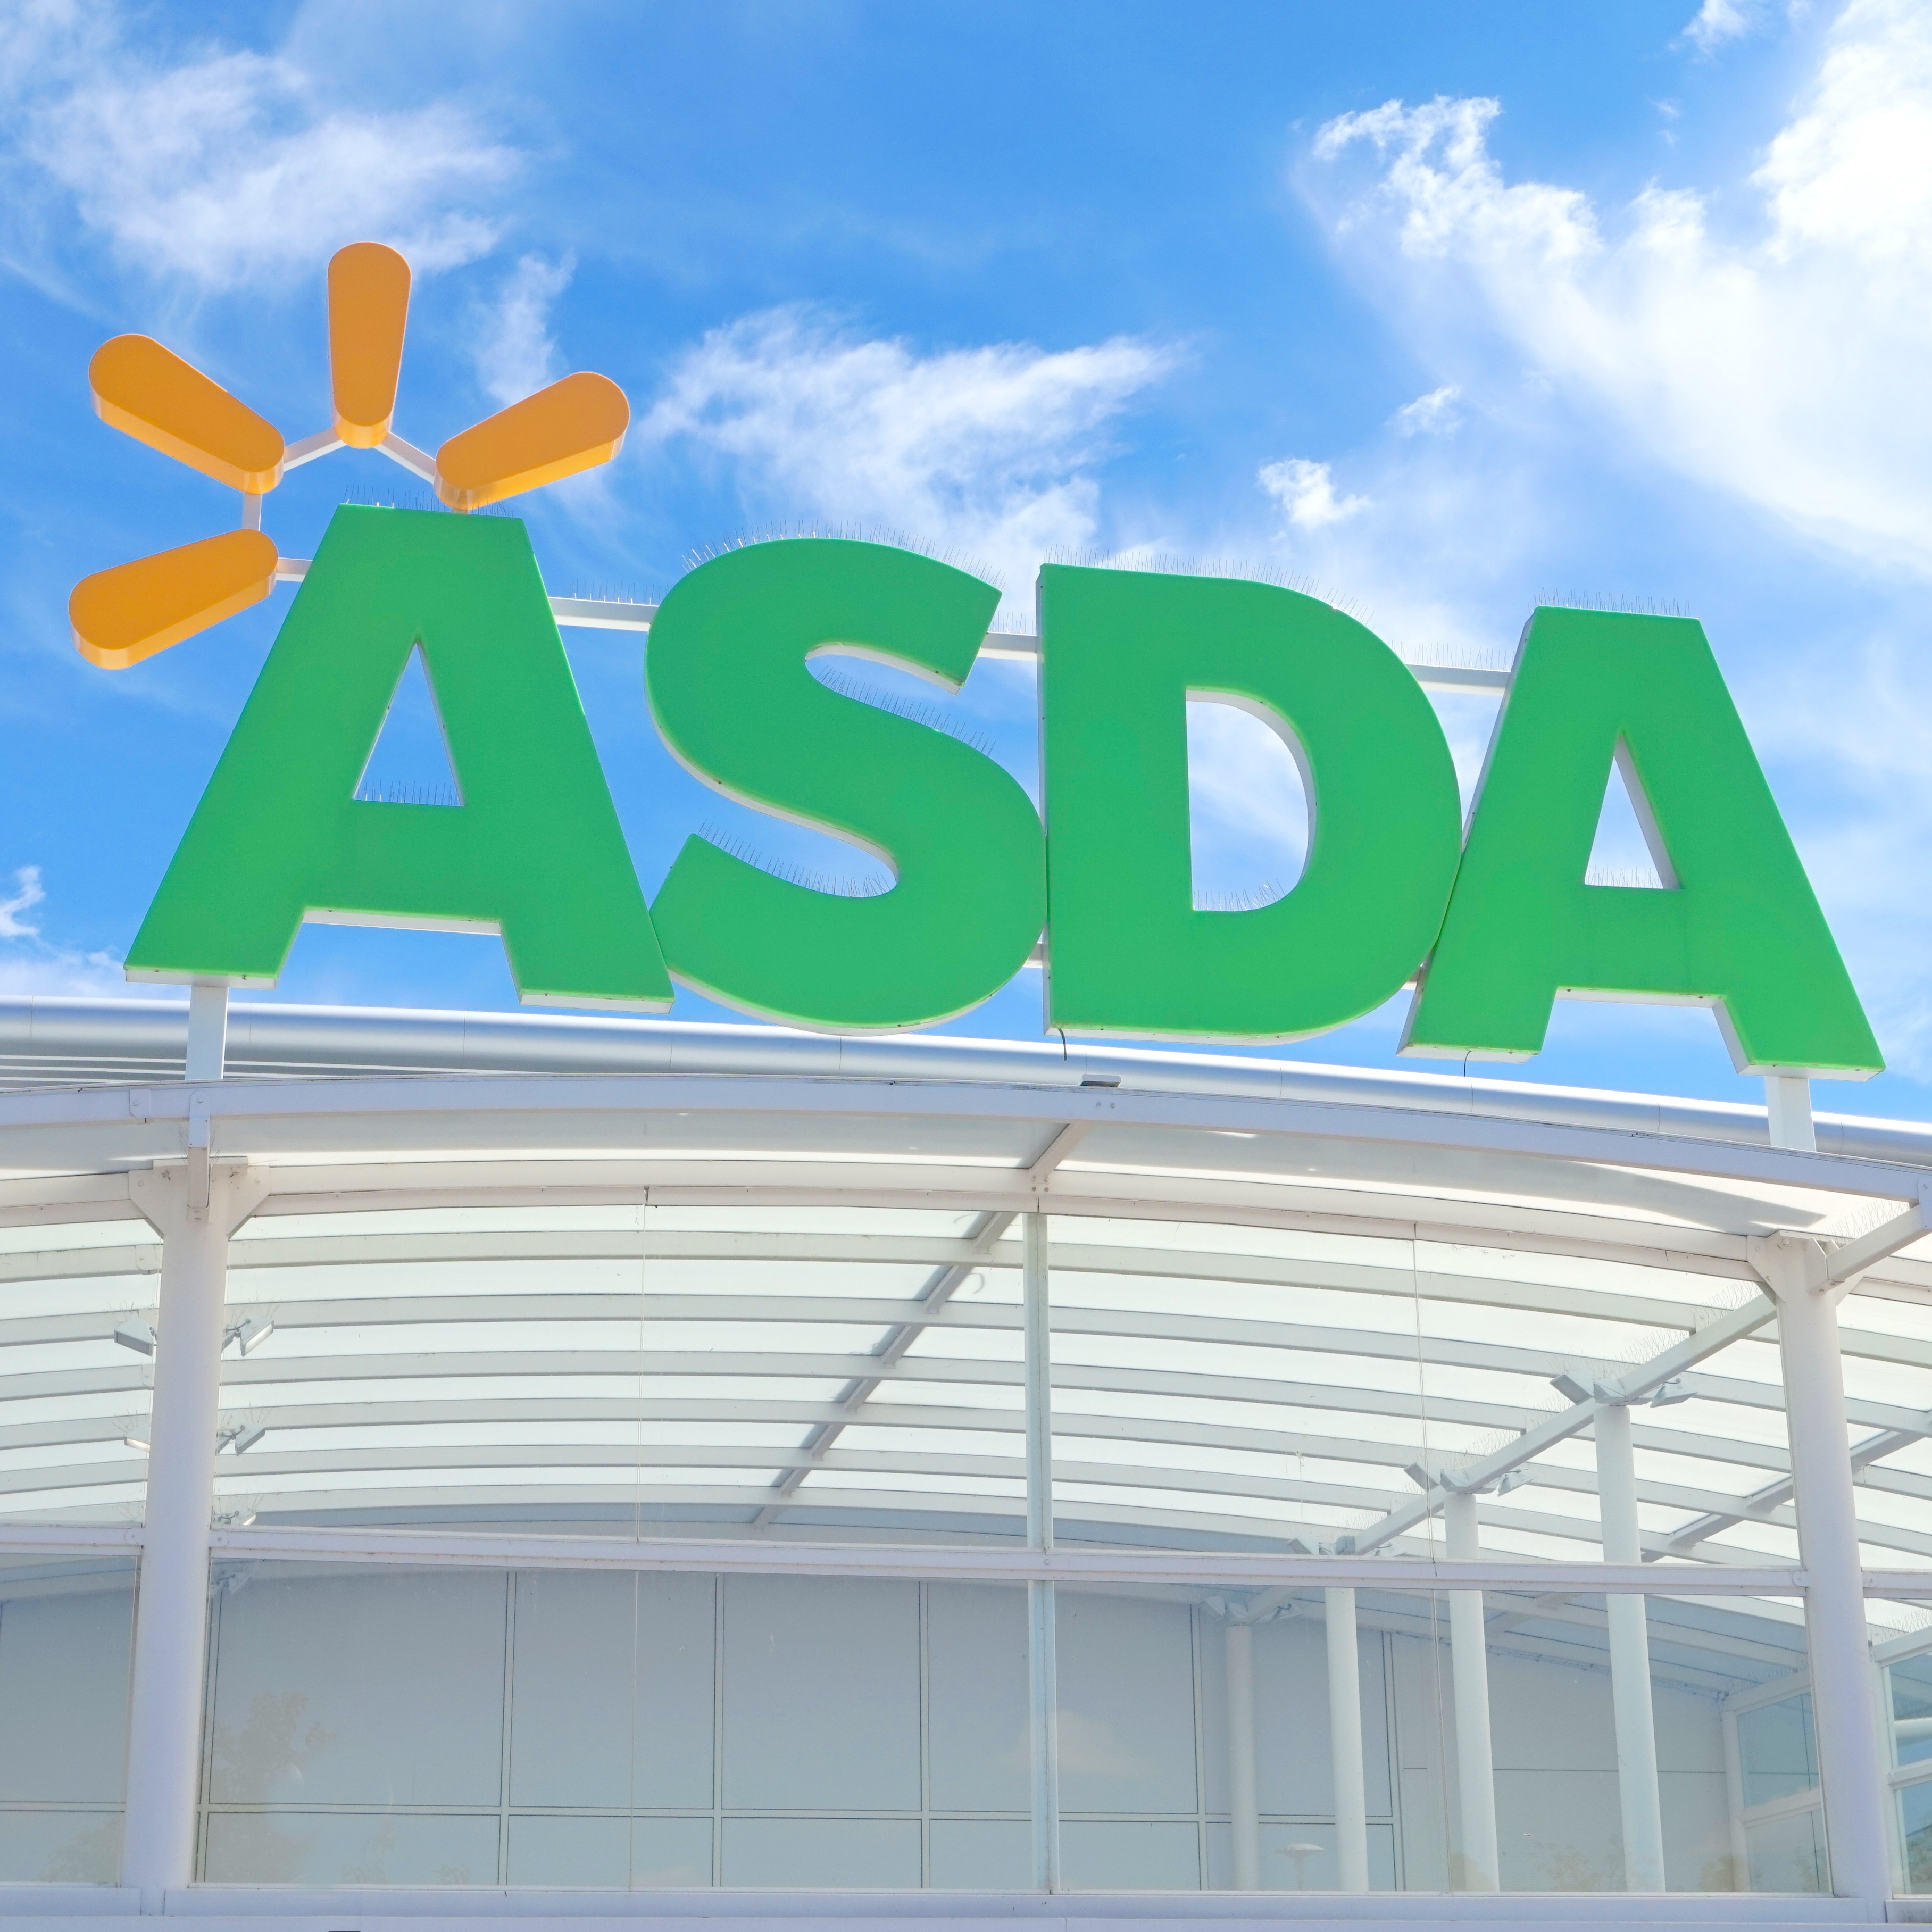 Asda launches first-ever loyalty scheme offering discounts on groceries – here's how it works